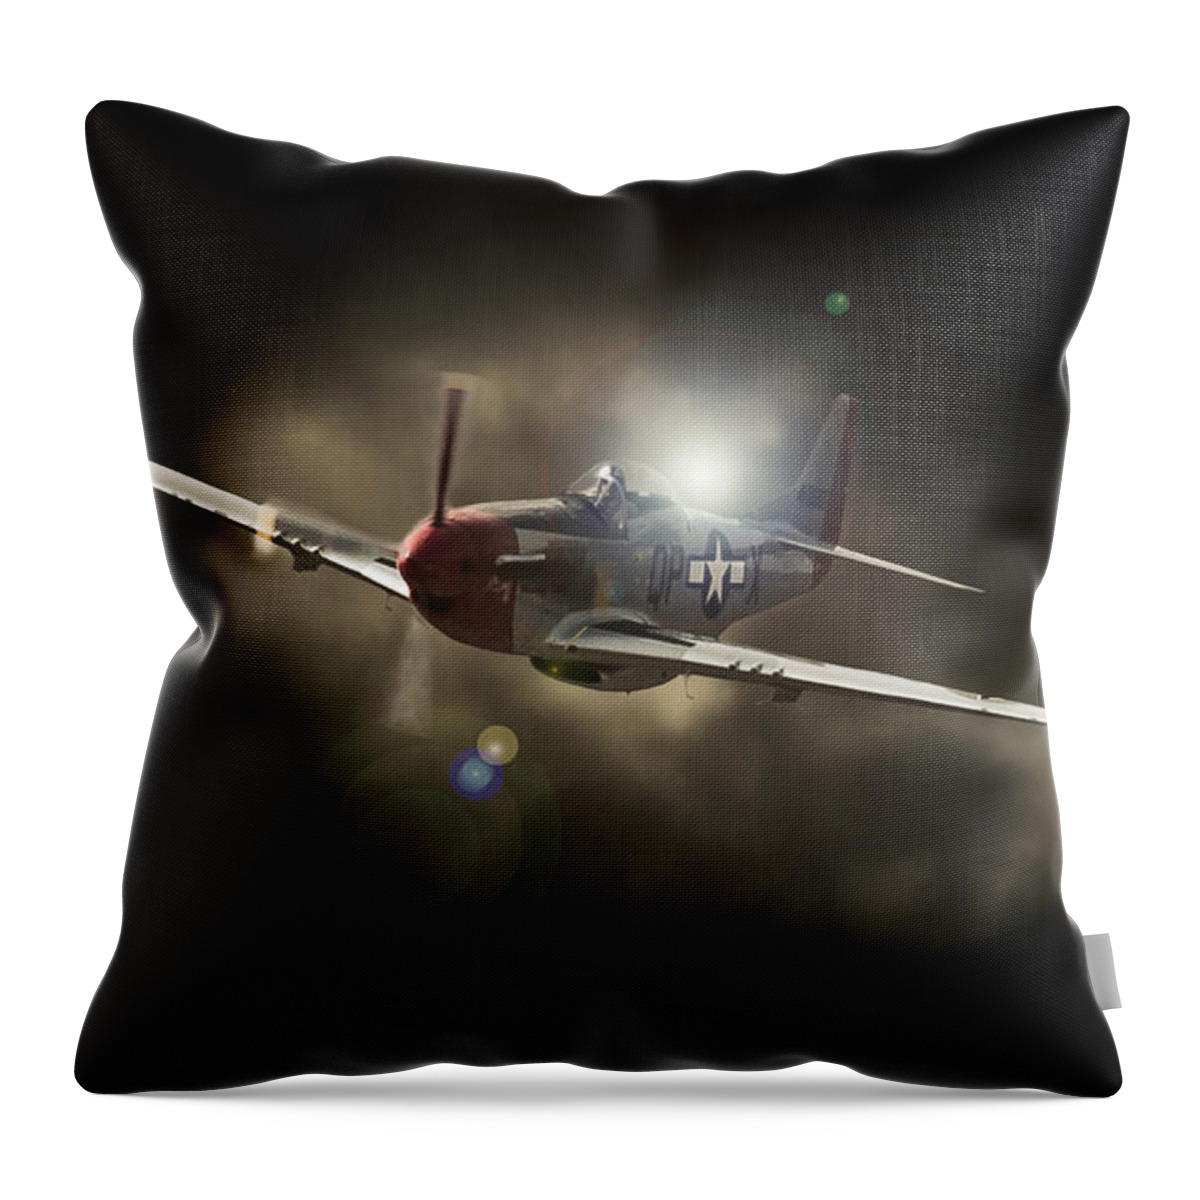 Lockheed P51 Mustang Throw Pillow featuring the photograph 51 by Paul Job